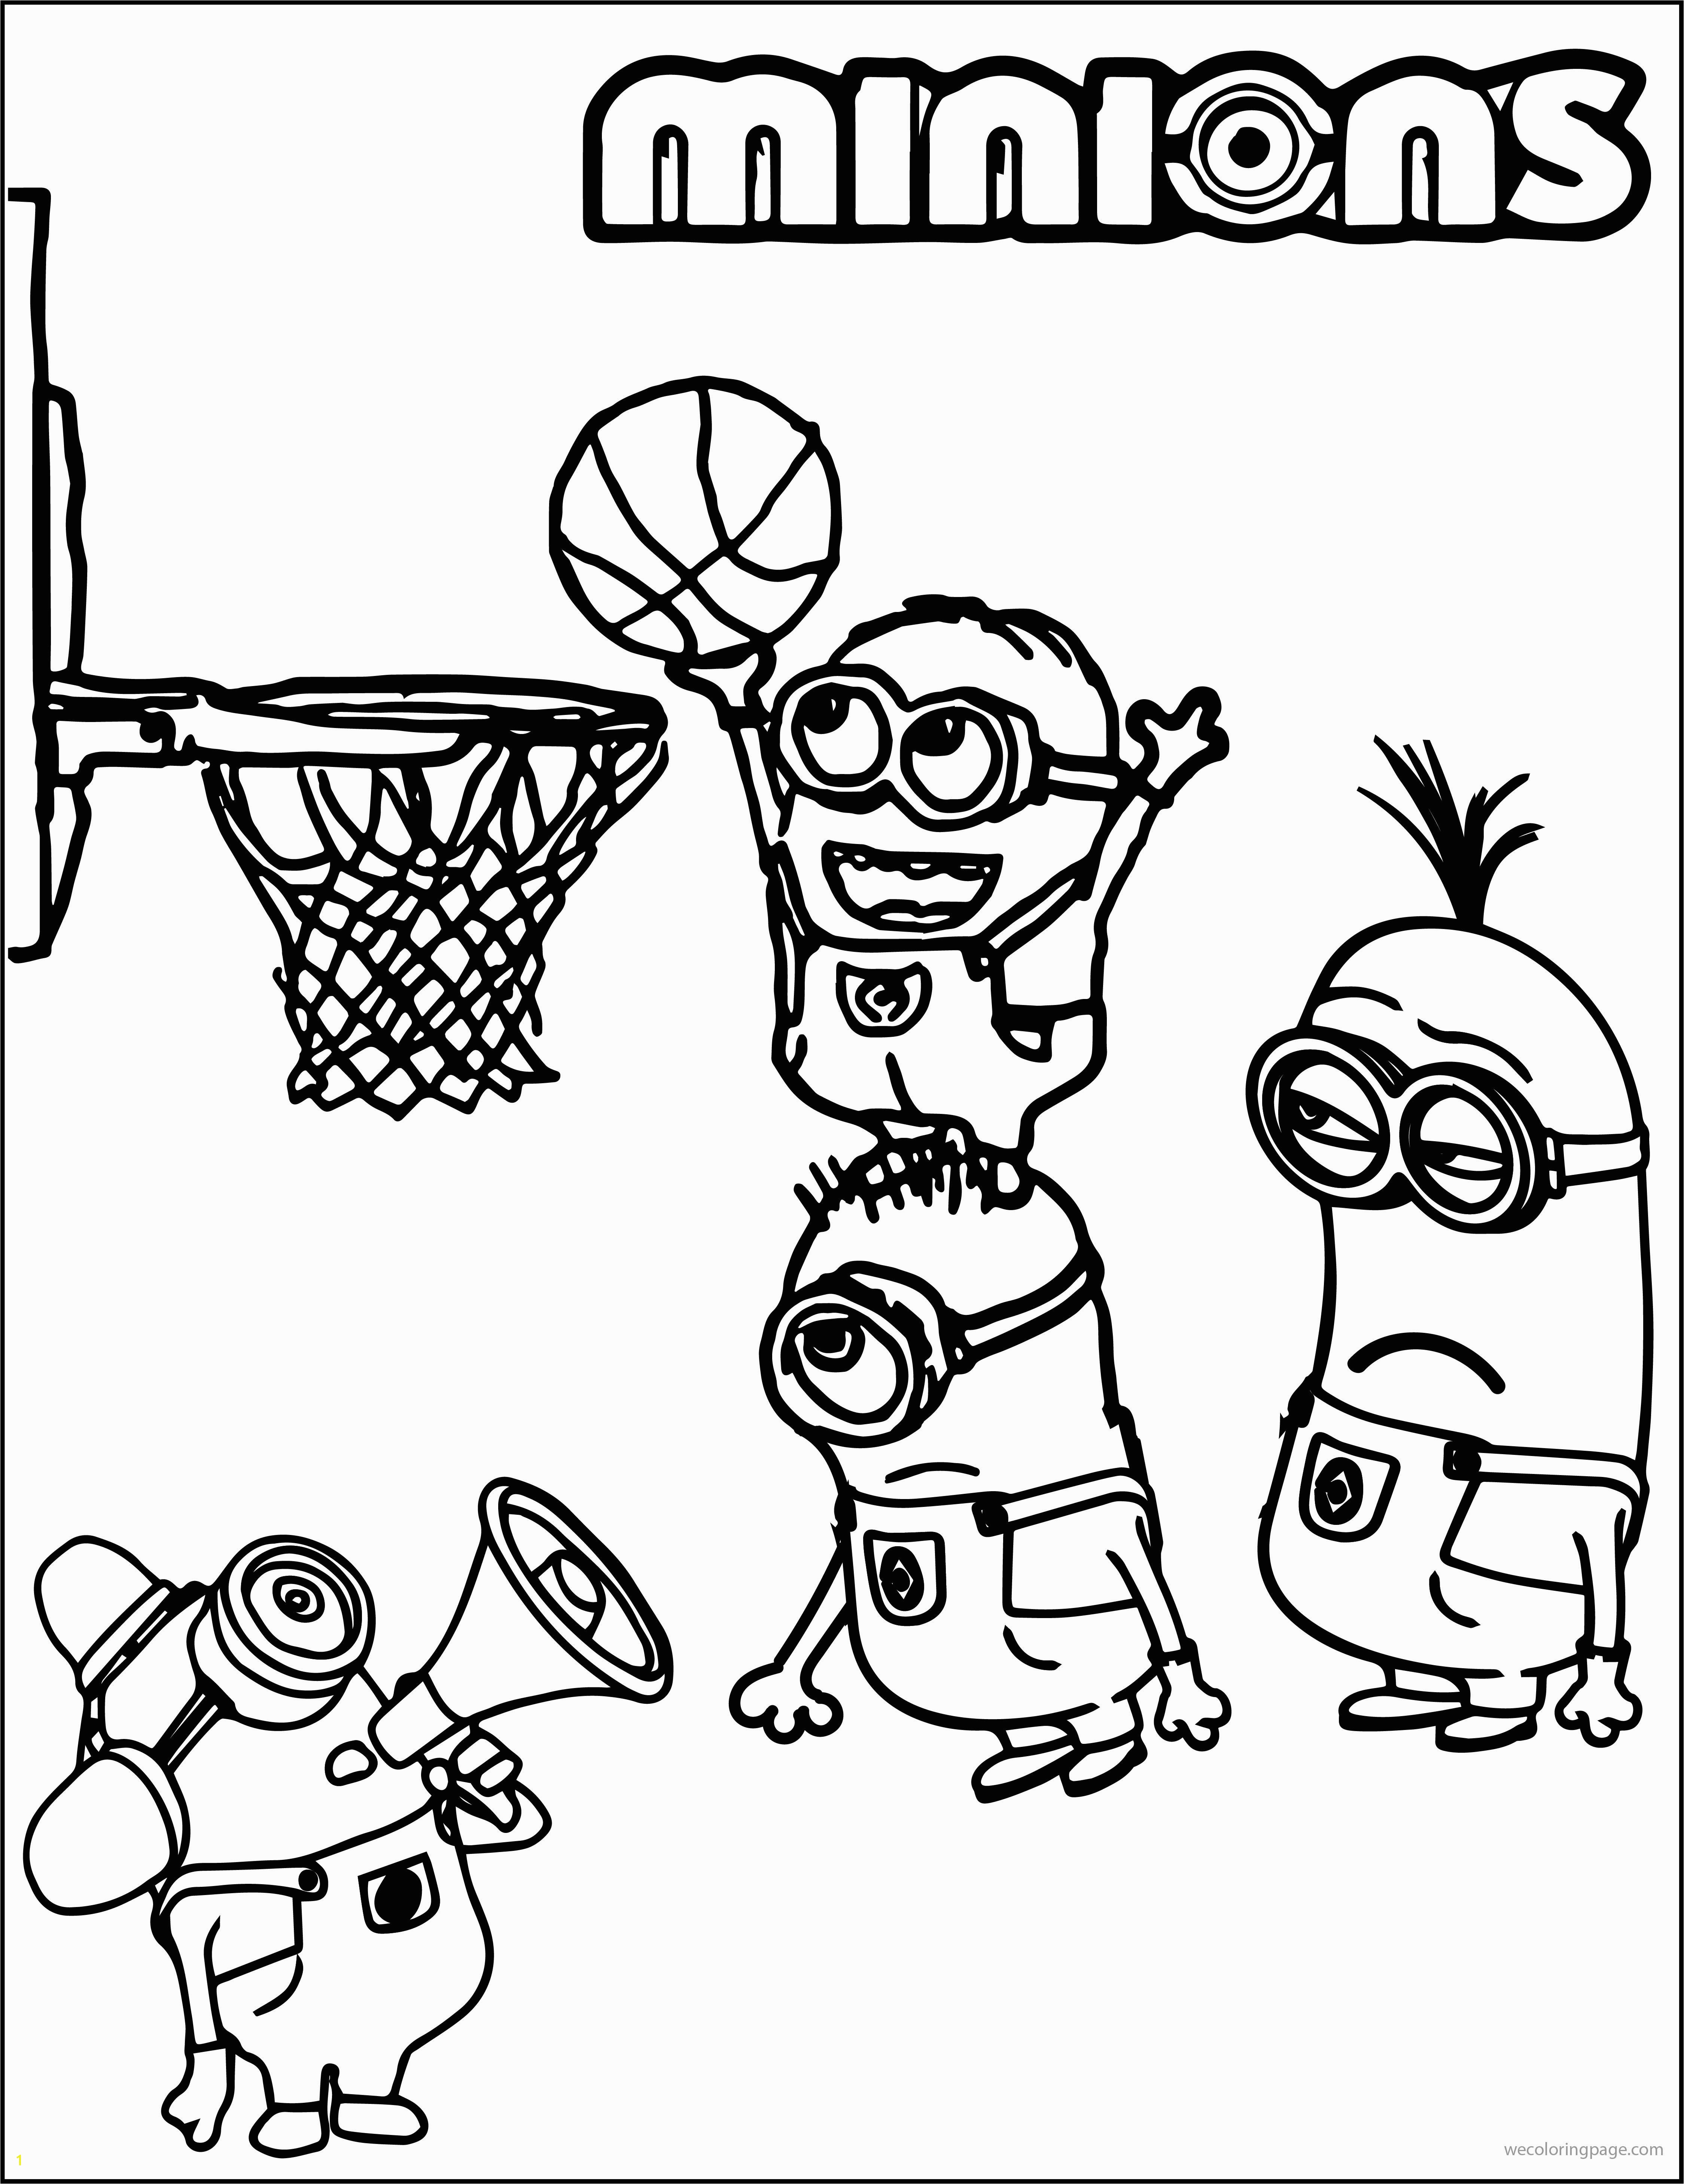 Minion Playing Basketball Coloring Pages